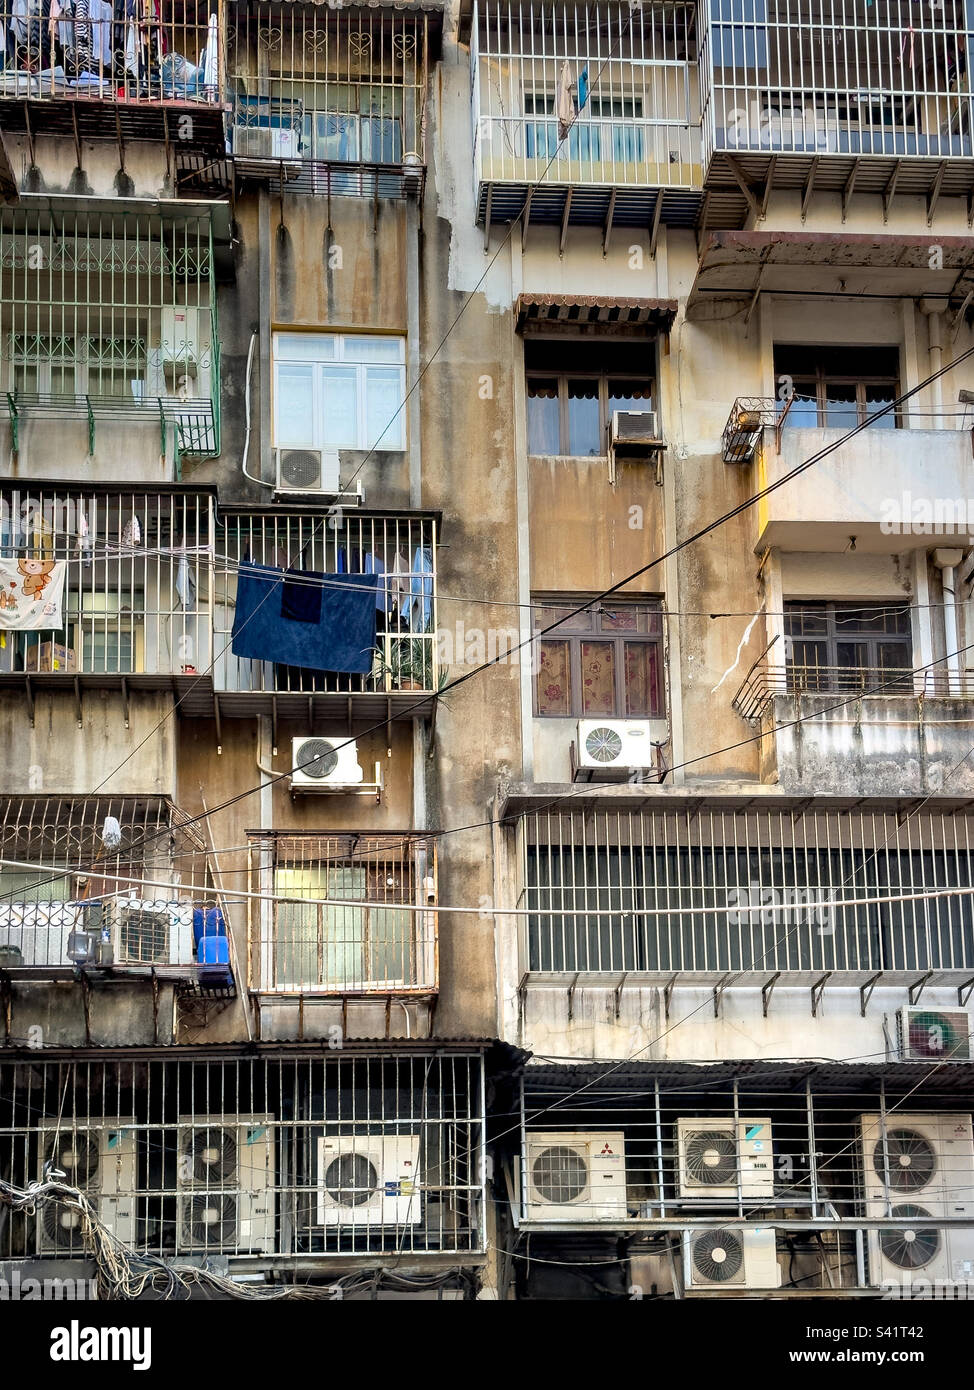 Crowded old concrete housing blocks in Macao, China Stock Photo